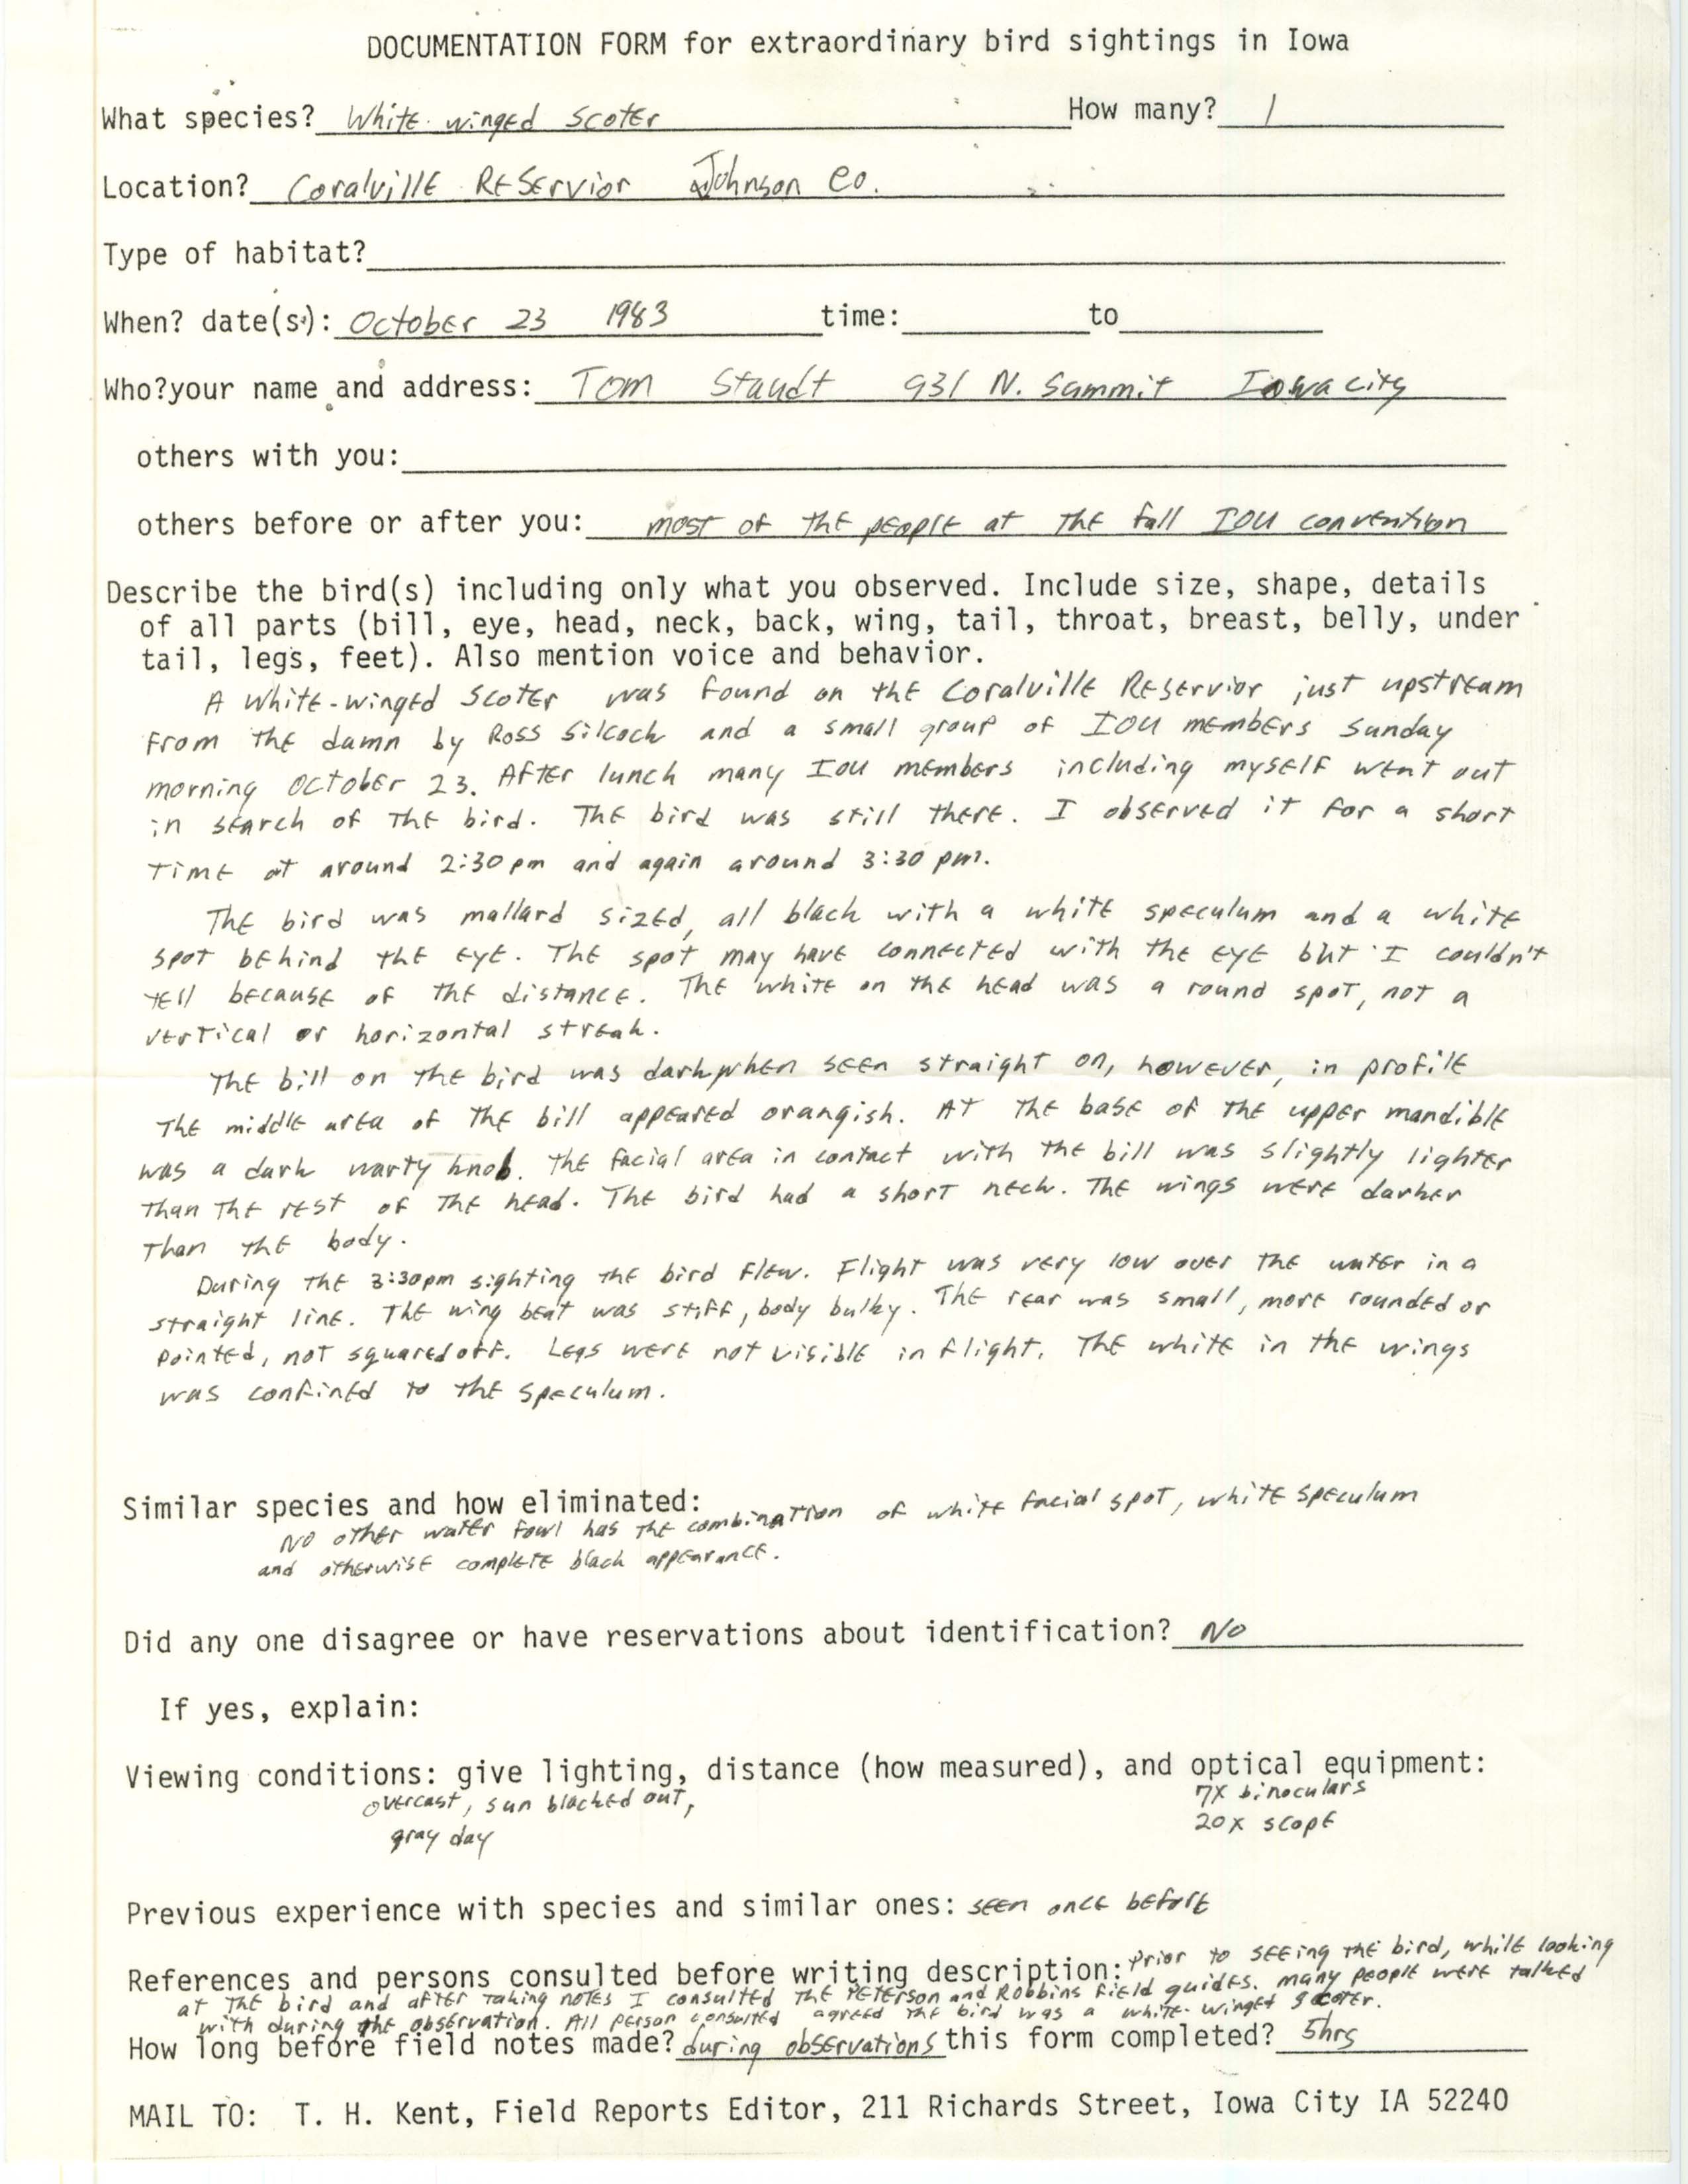 Rare bird documentation form for White-winged Scoter at Coralville Reservoir, 1983